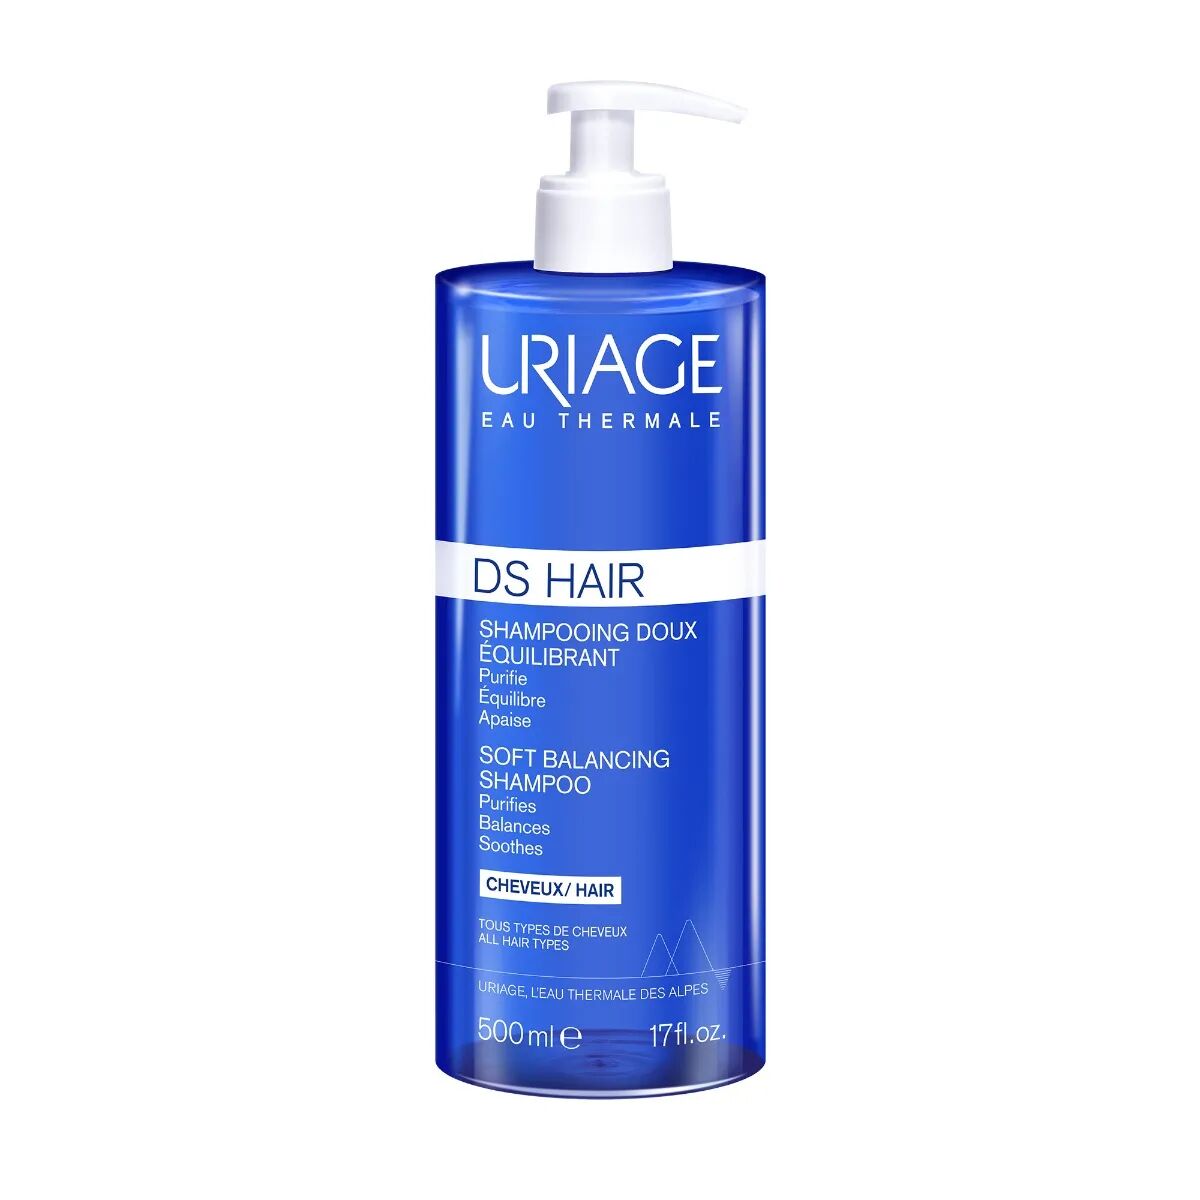 Uriage DS Hair Shampoo Delicato Riequilibrante 500 ml